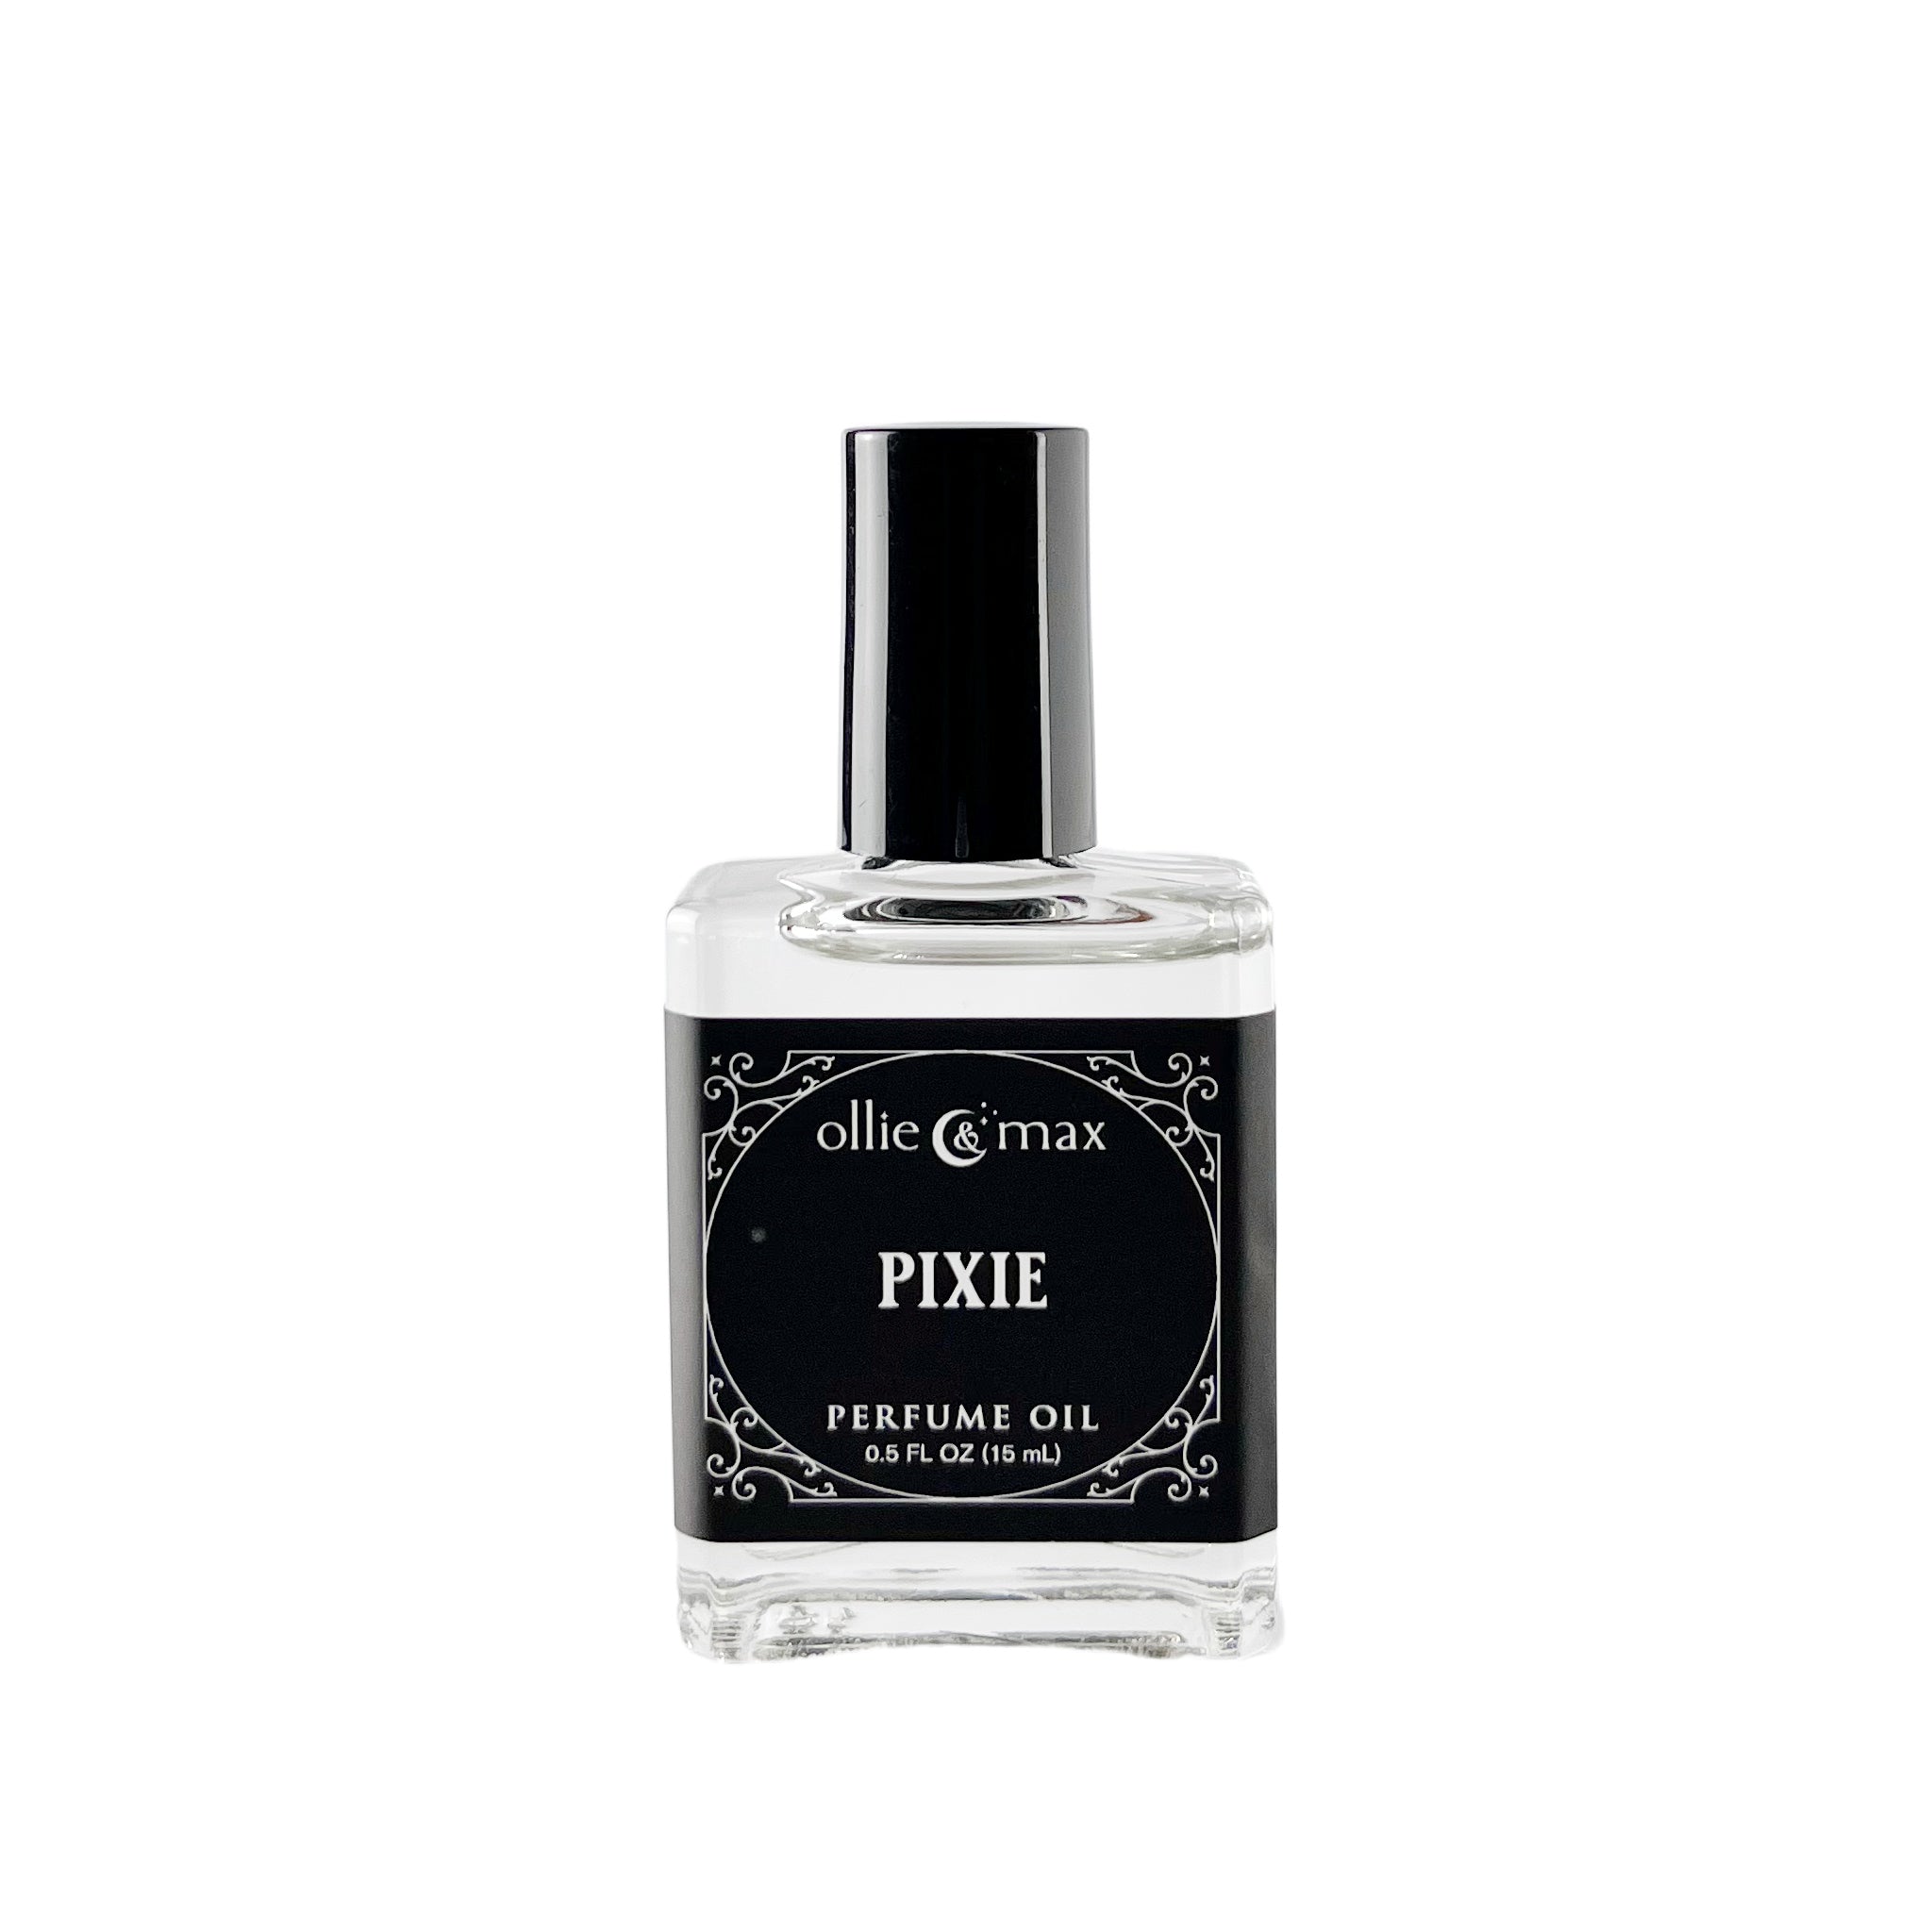 rectangular glass bottle with black cap and label, pixie perfume oil, 15ml